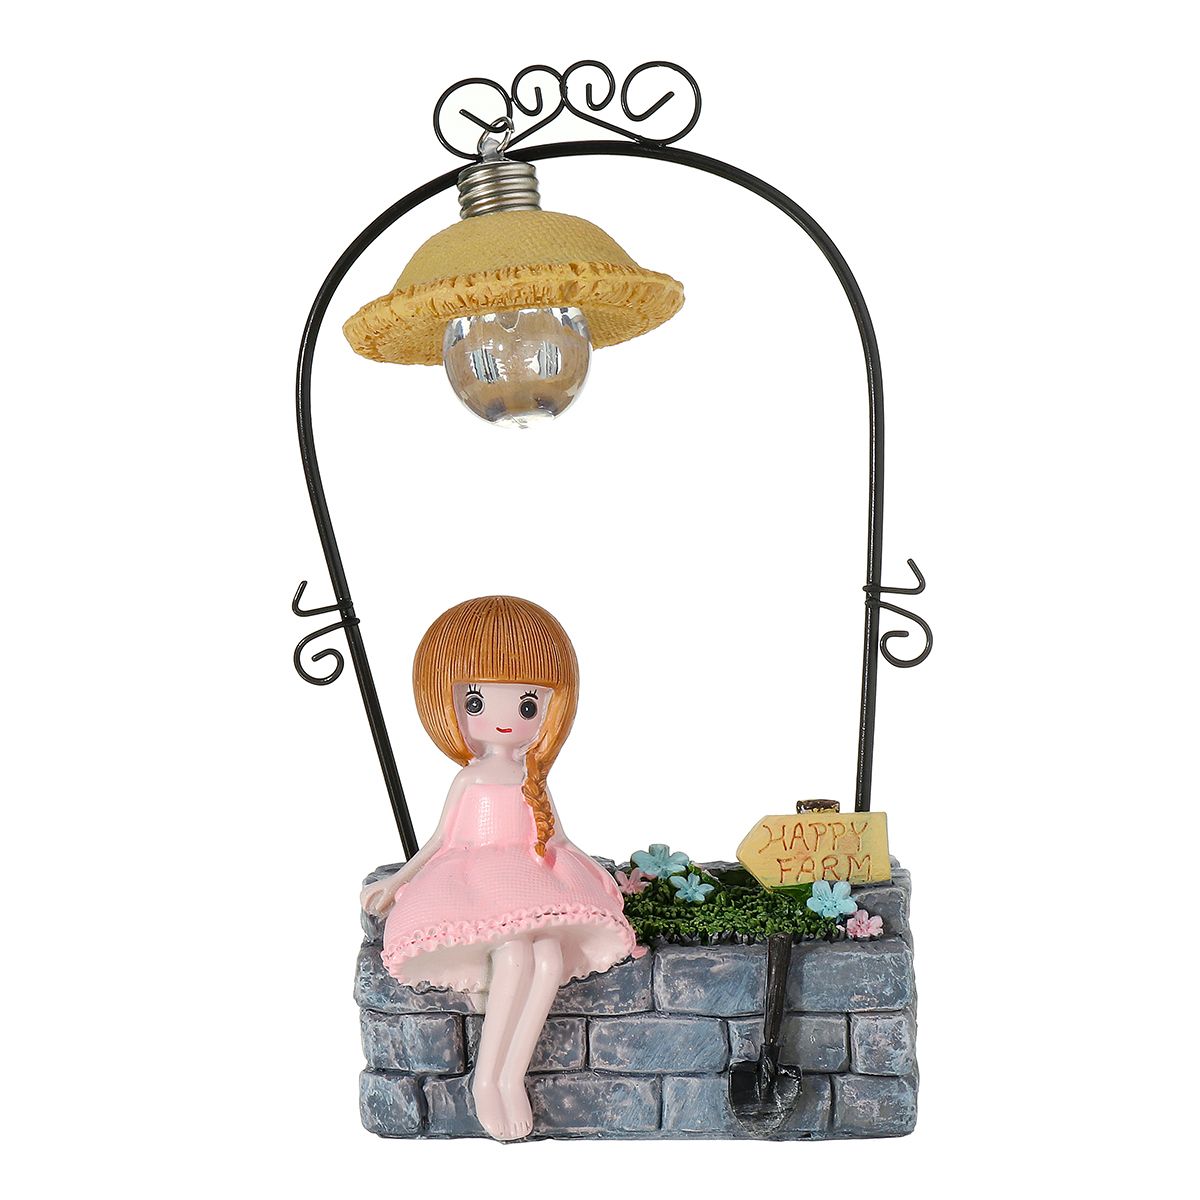 Creative-Farm-Girl-Table-Night-Light-Resin-Craft-Character-Ornaments-Xmas-Gifts-1640922